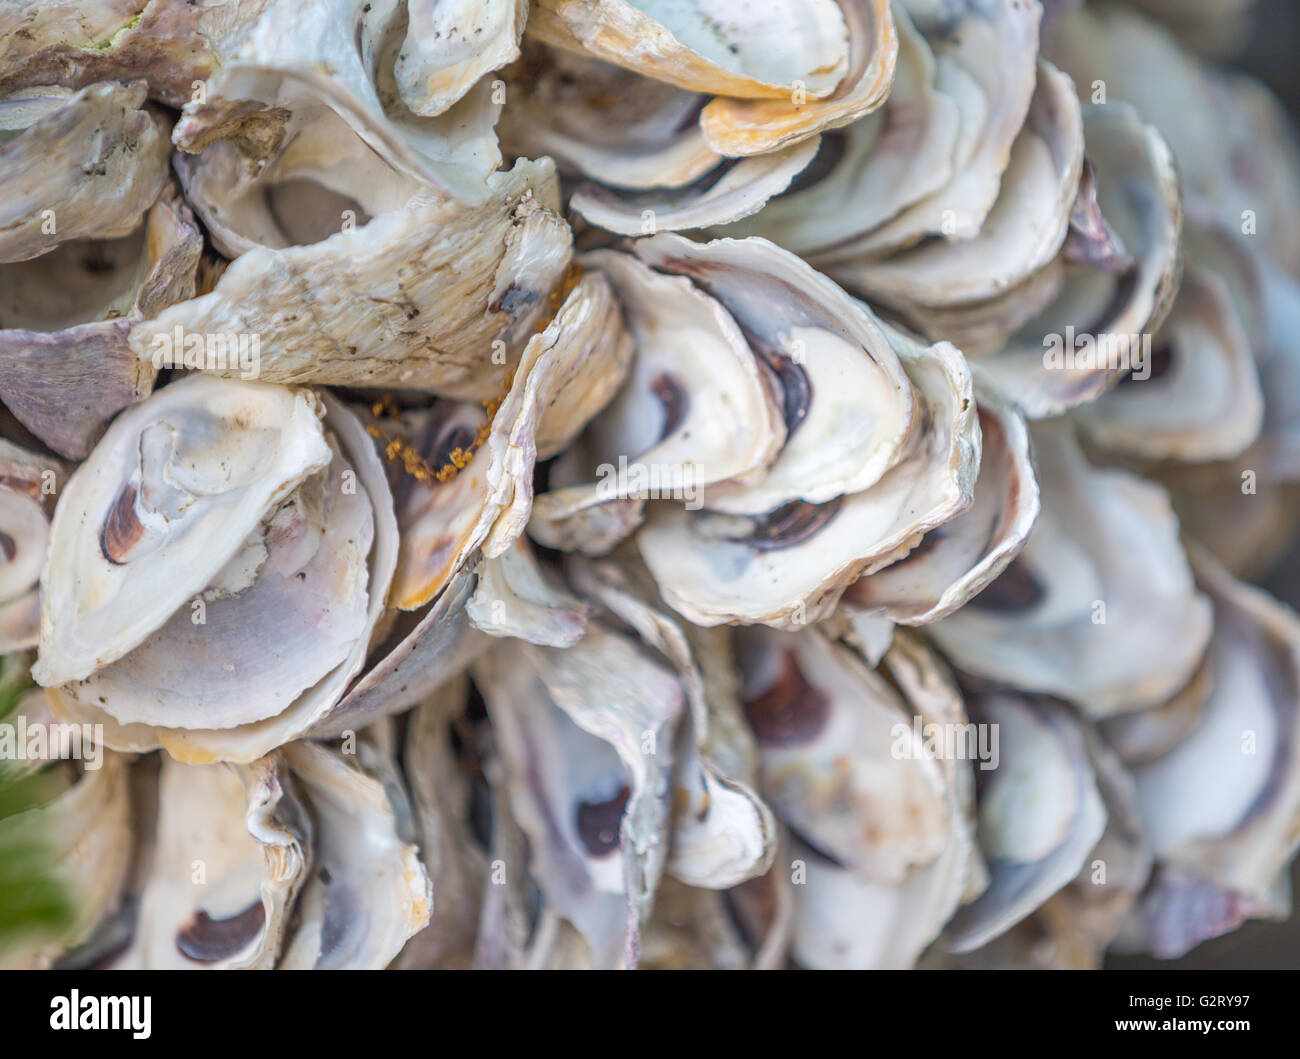 clam shells, many clam shells that are empty and open Stock Photo